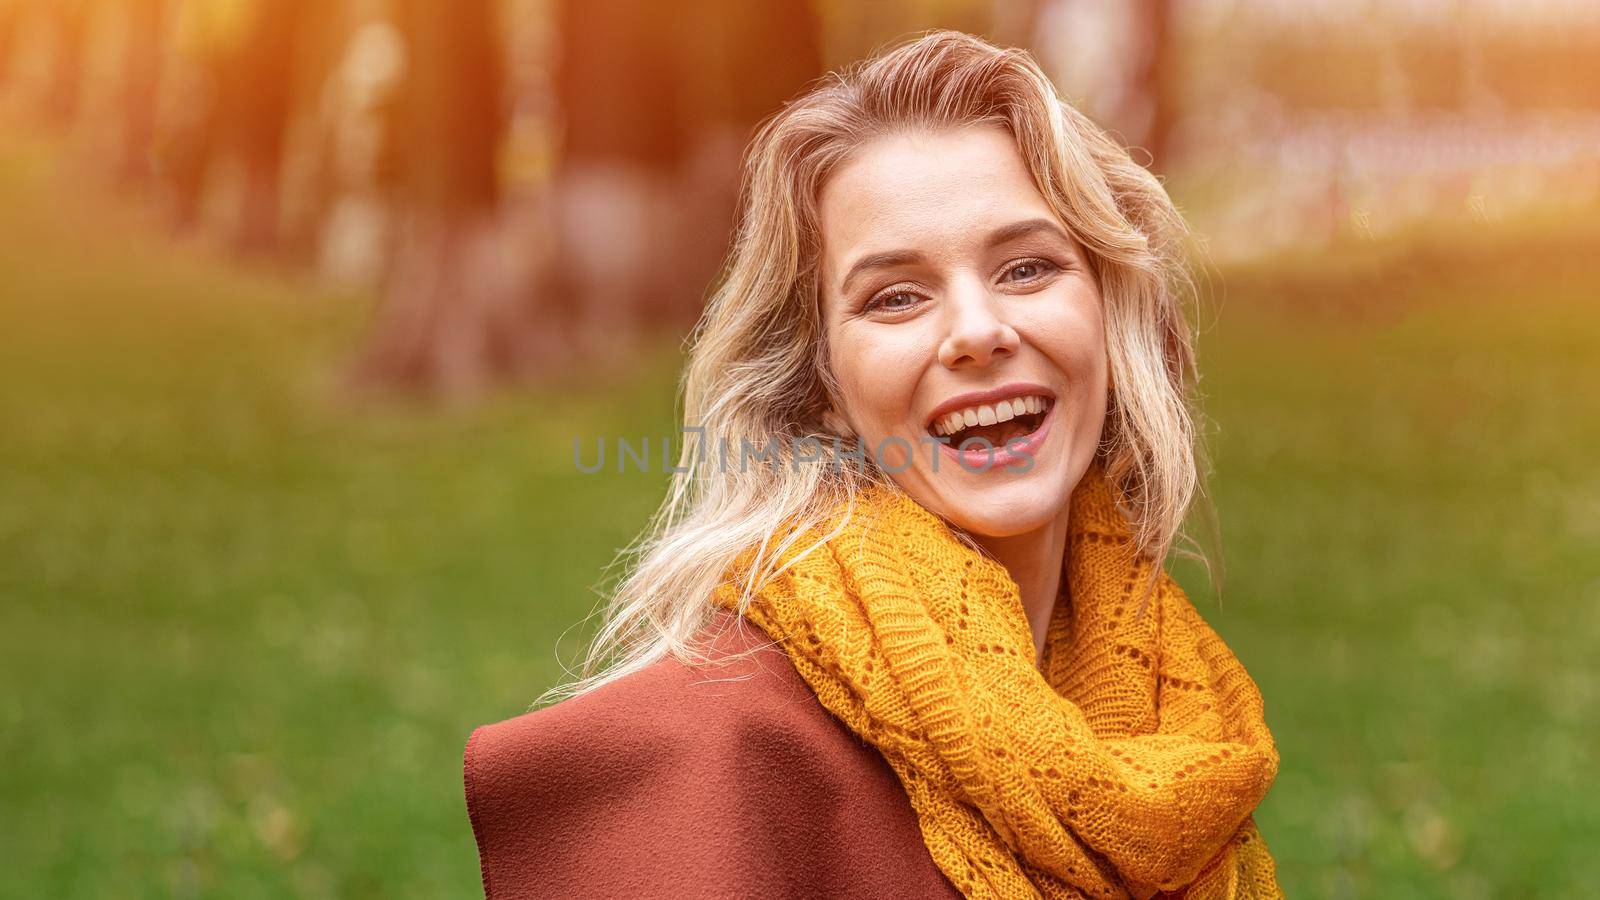 Joyful young woman in autumn coat and yellow knitted scarf standing joyful smiling in the fall yellow garden or park. Beautiful smiling young woman in autumn leaves by LipikStockMedia